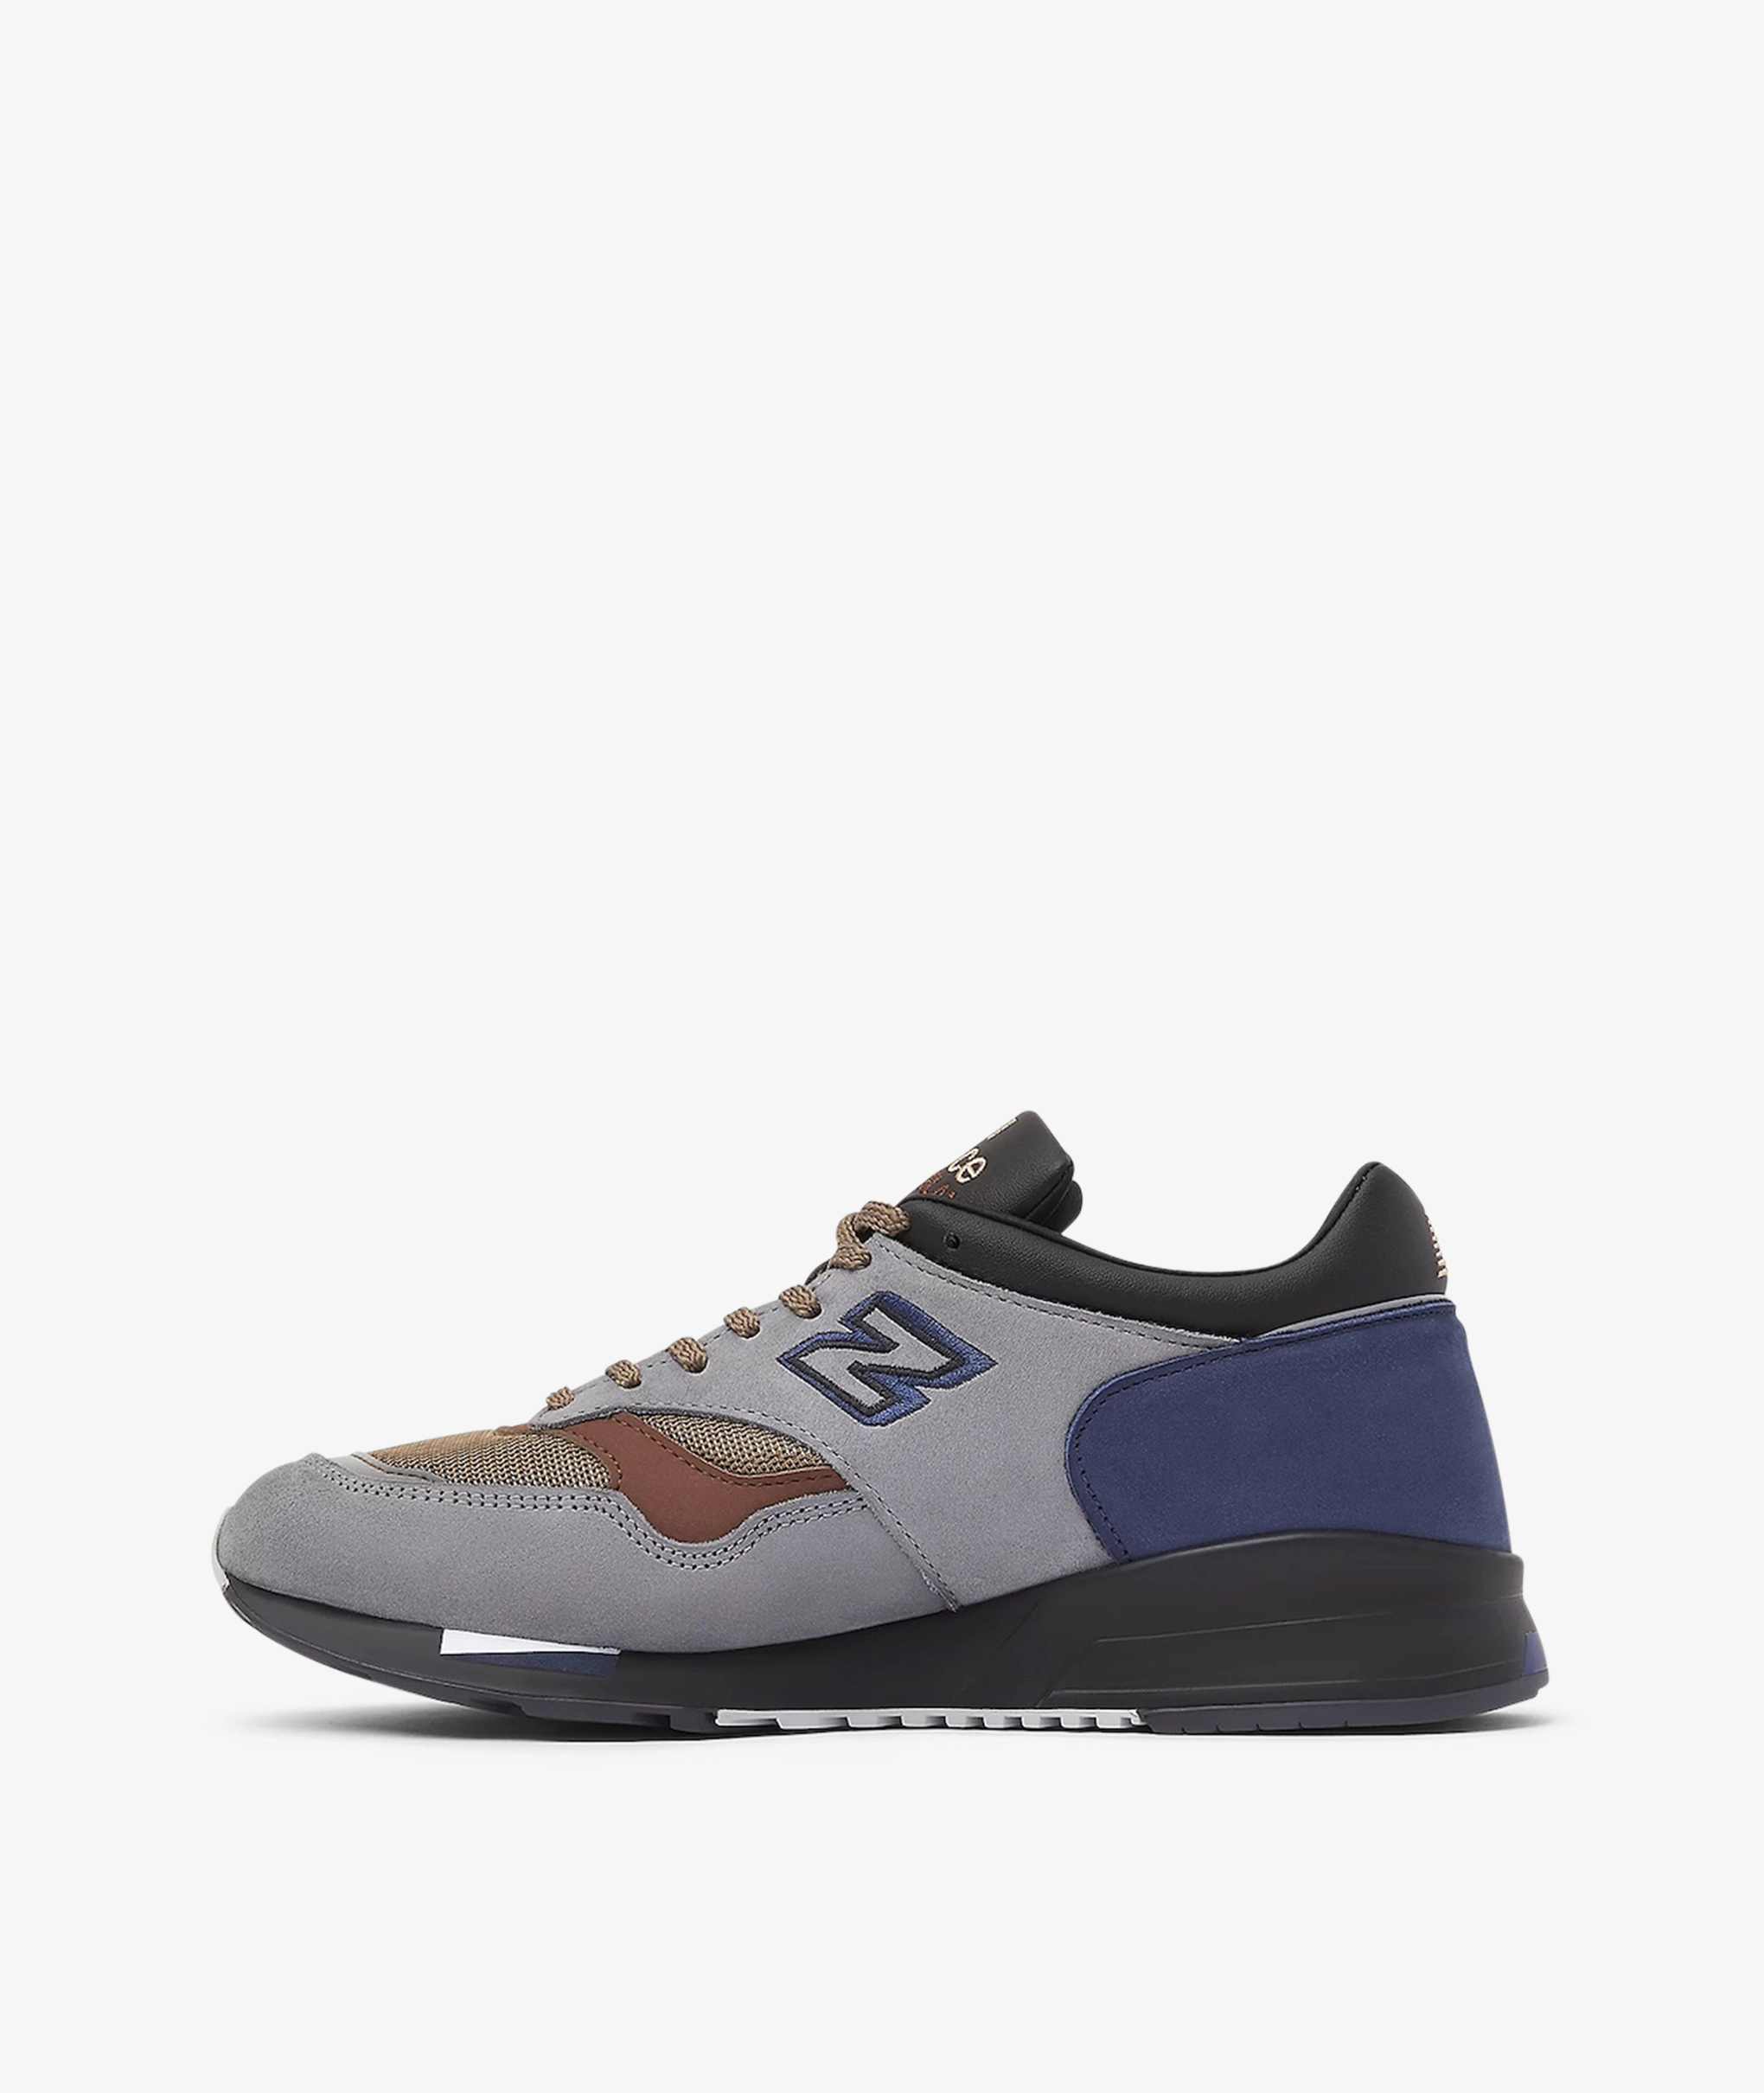 Norse Store | Shipping Worldwide - New Balance M1500INV - Grey/Navy